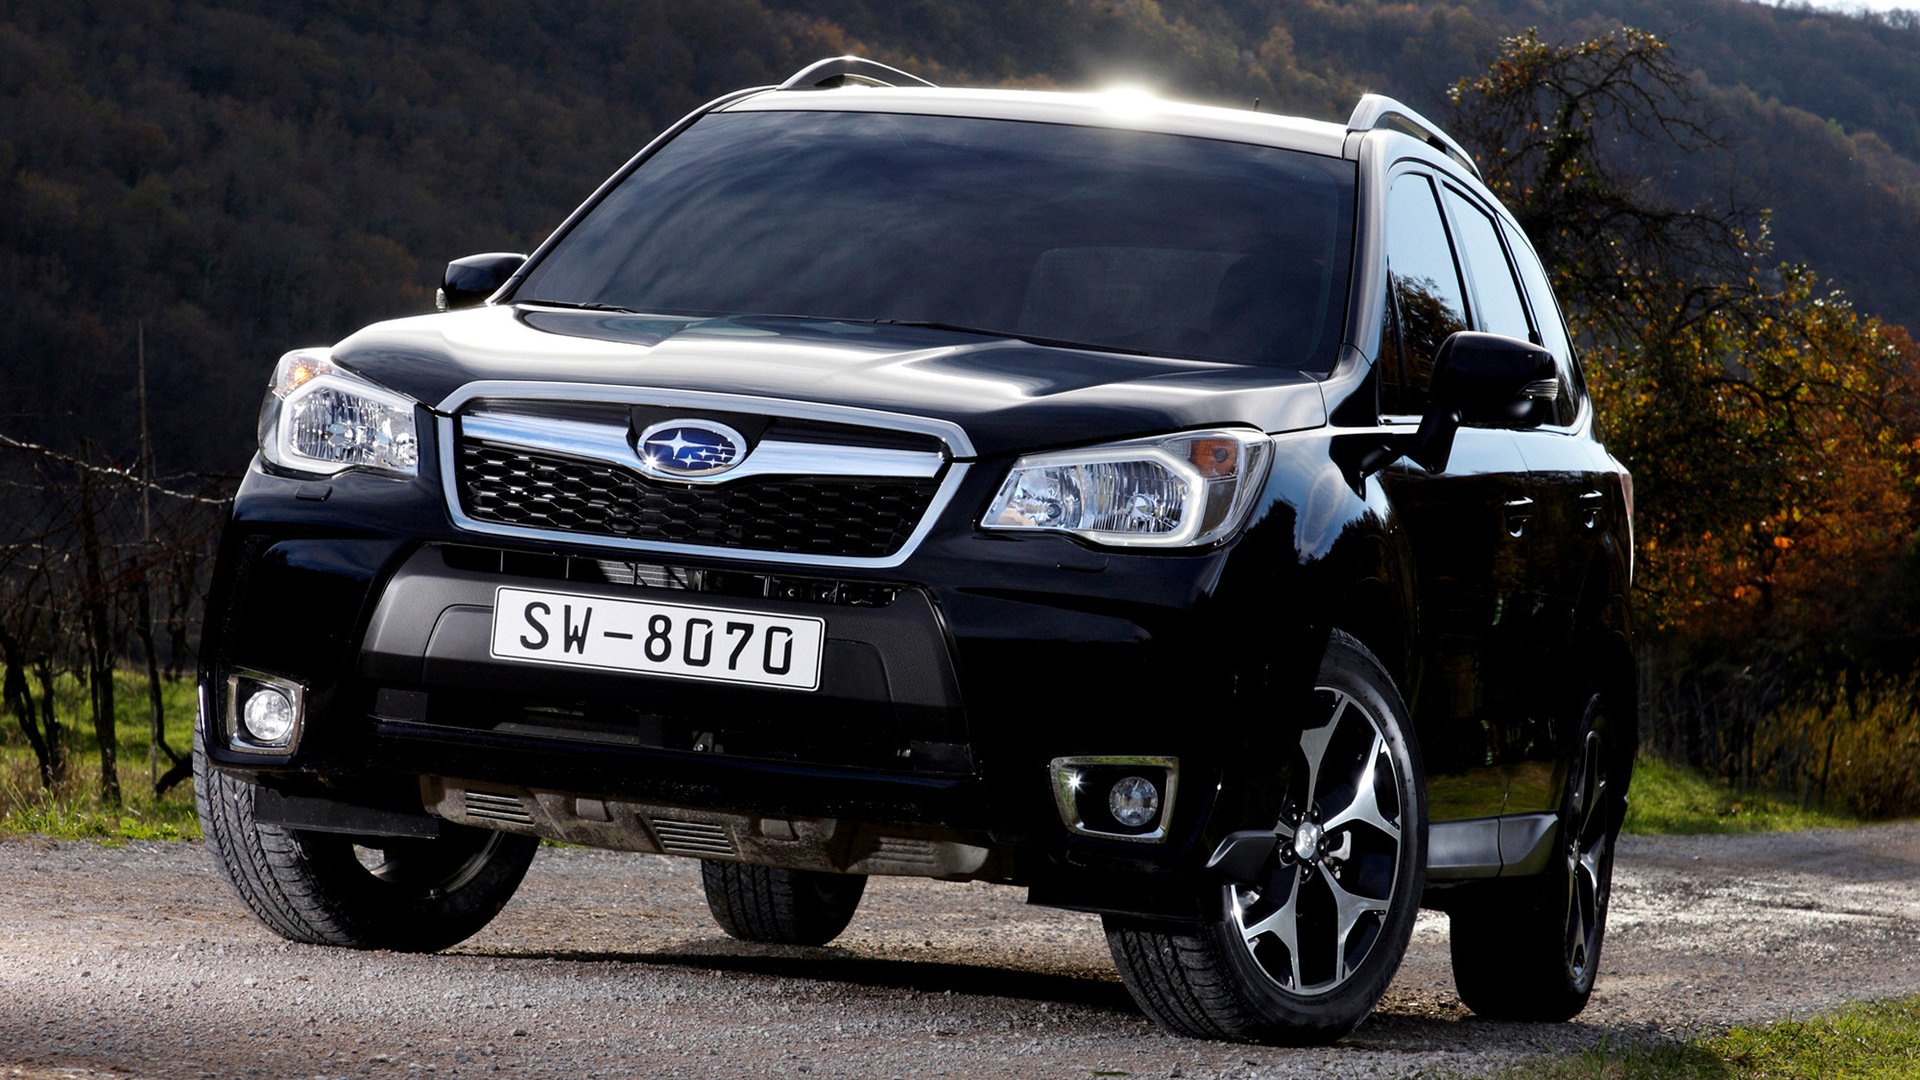 Subaru Forester 2.0XT (2012) Wallpapers and HD Images